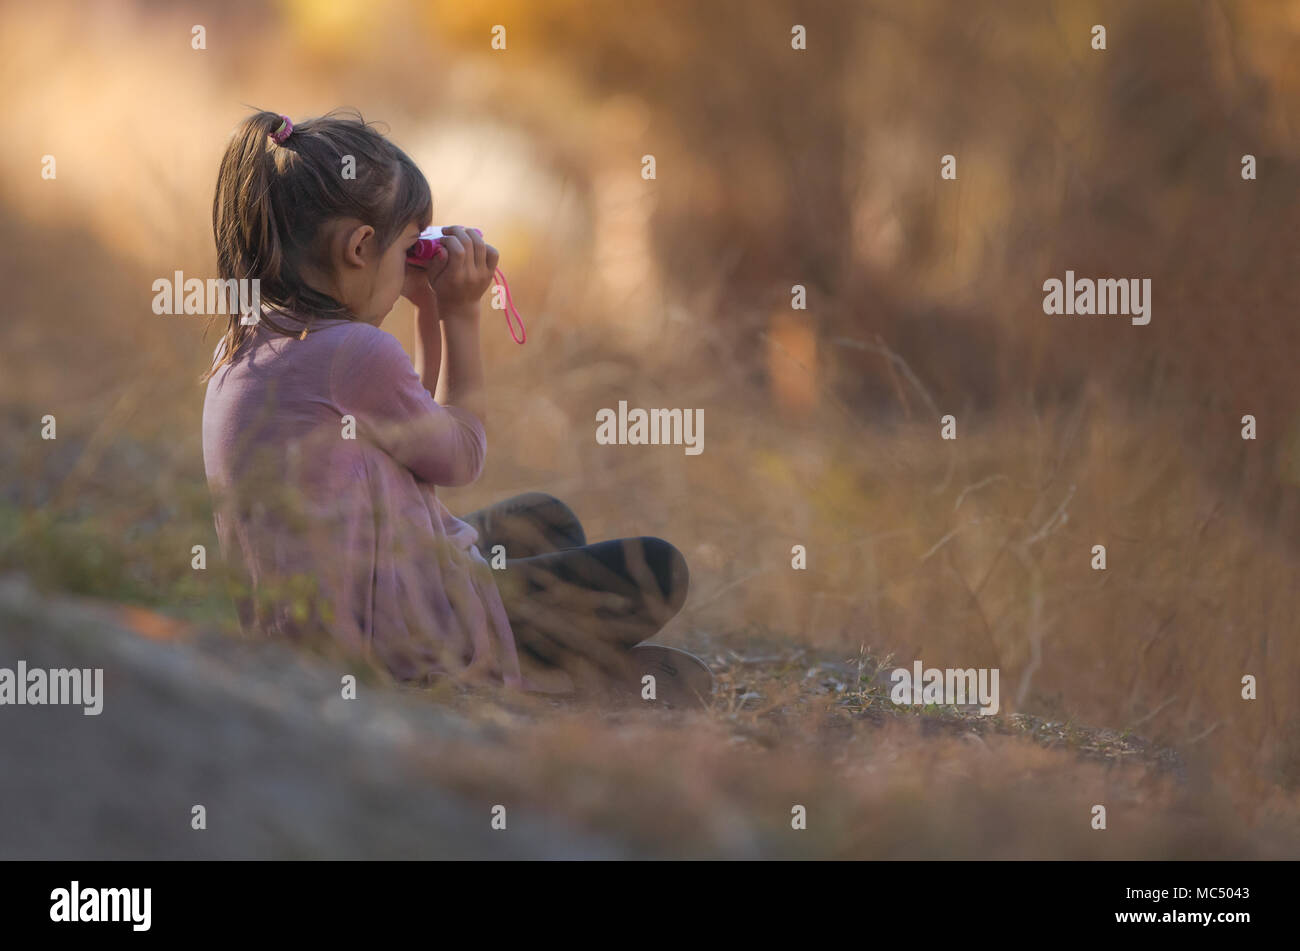 Cute Girl Playing In The Forest With Binoculars Stock Photo